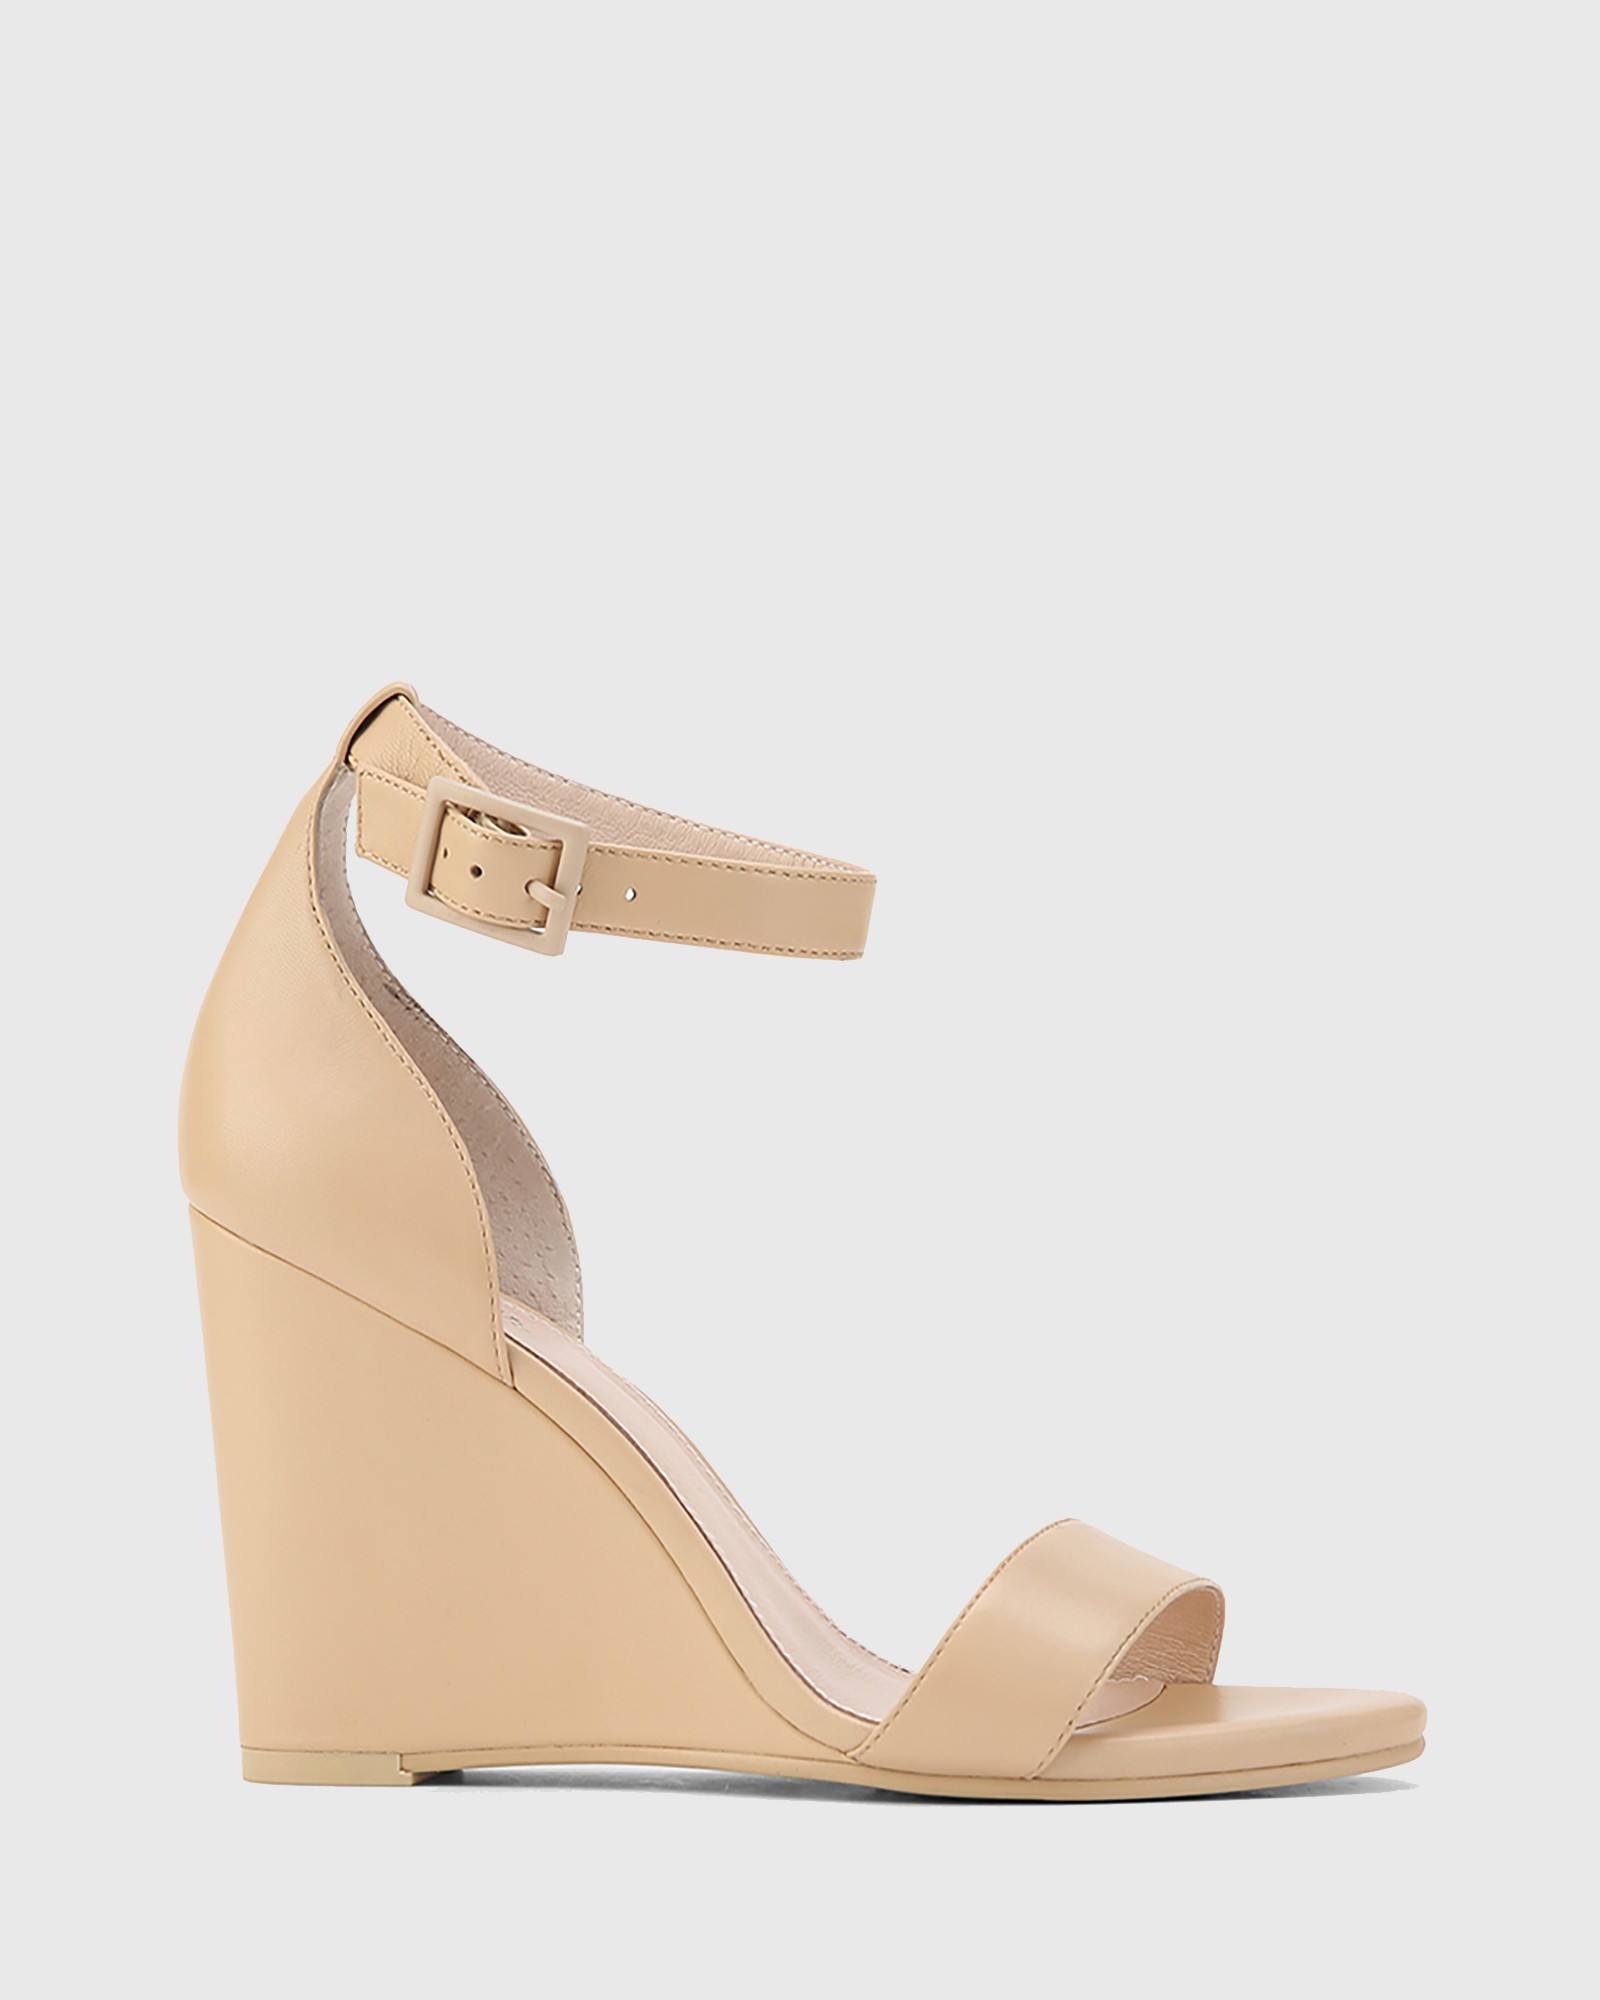 Remina Nappa Leather Wedge Heel Sandals Beige by Wittner | ShoeSales